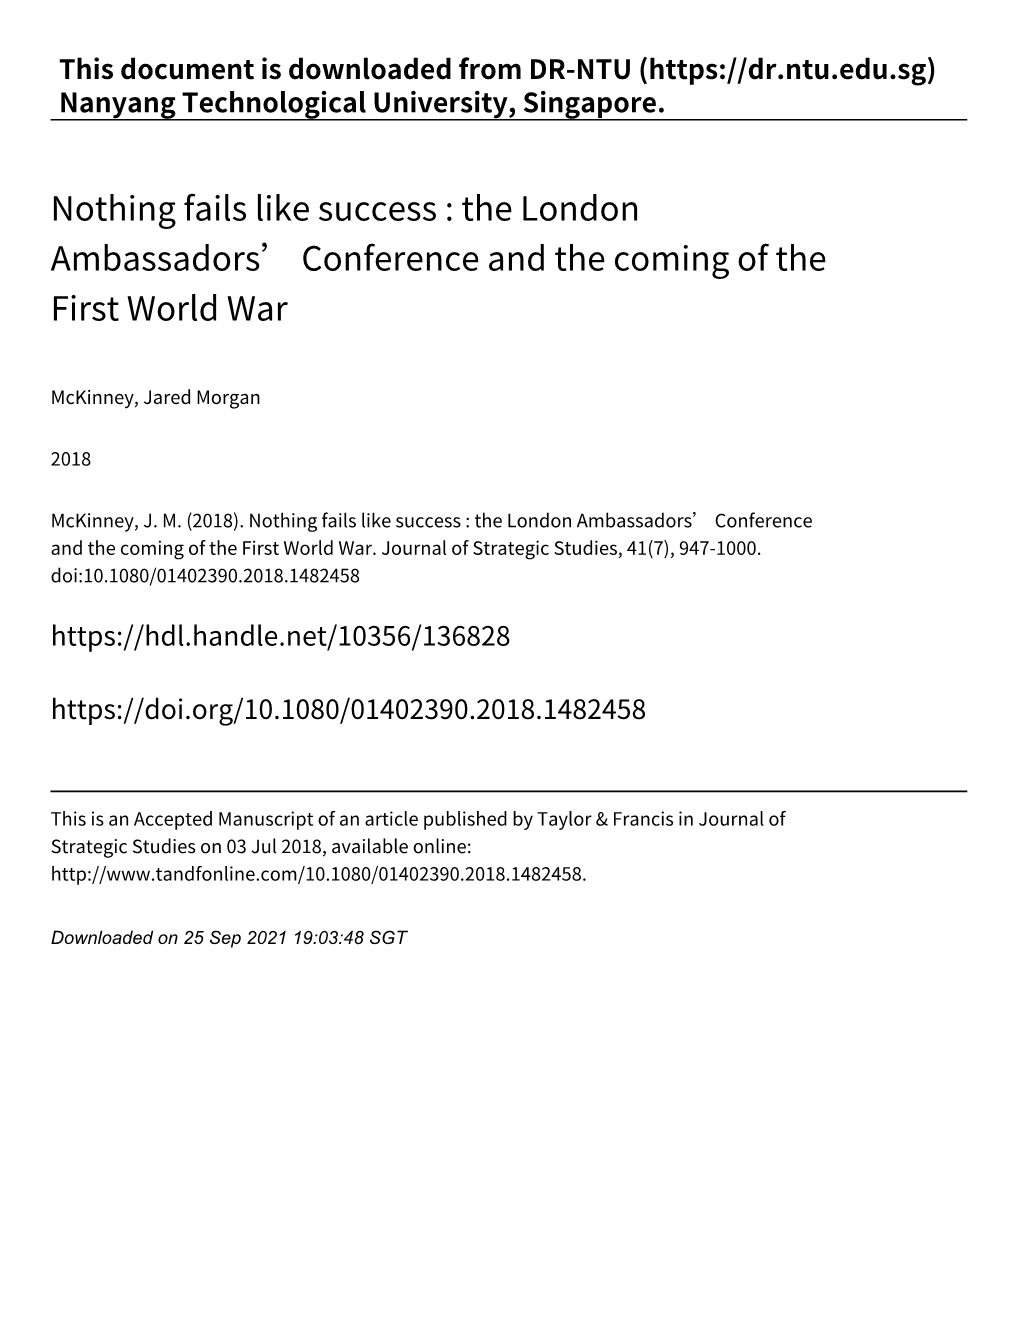 Nothing Fails Like Success : the London Ambassadors' Conference and The